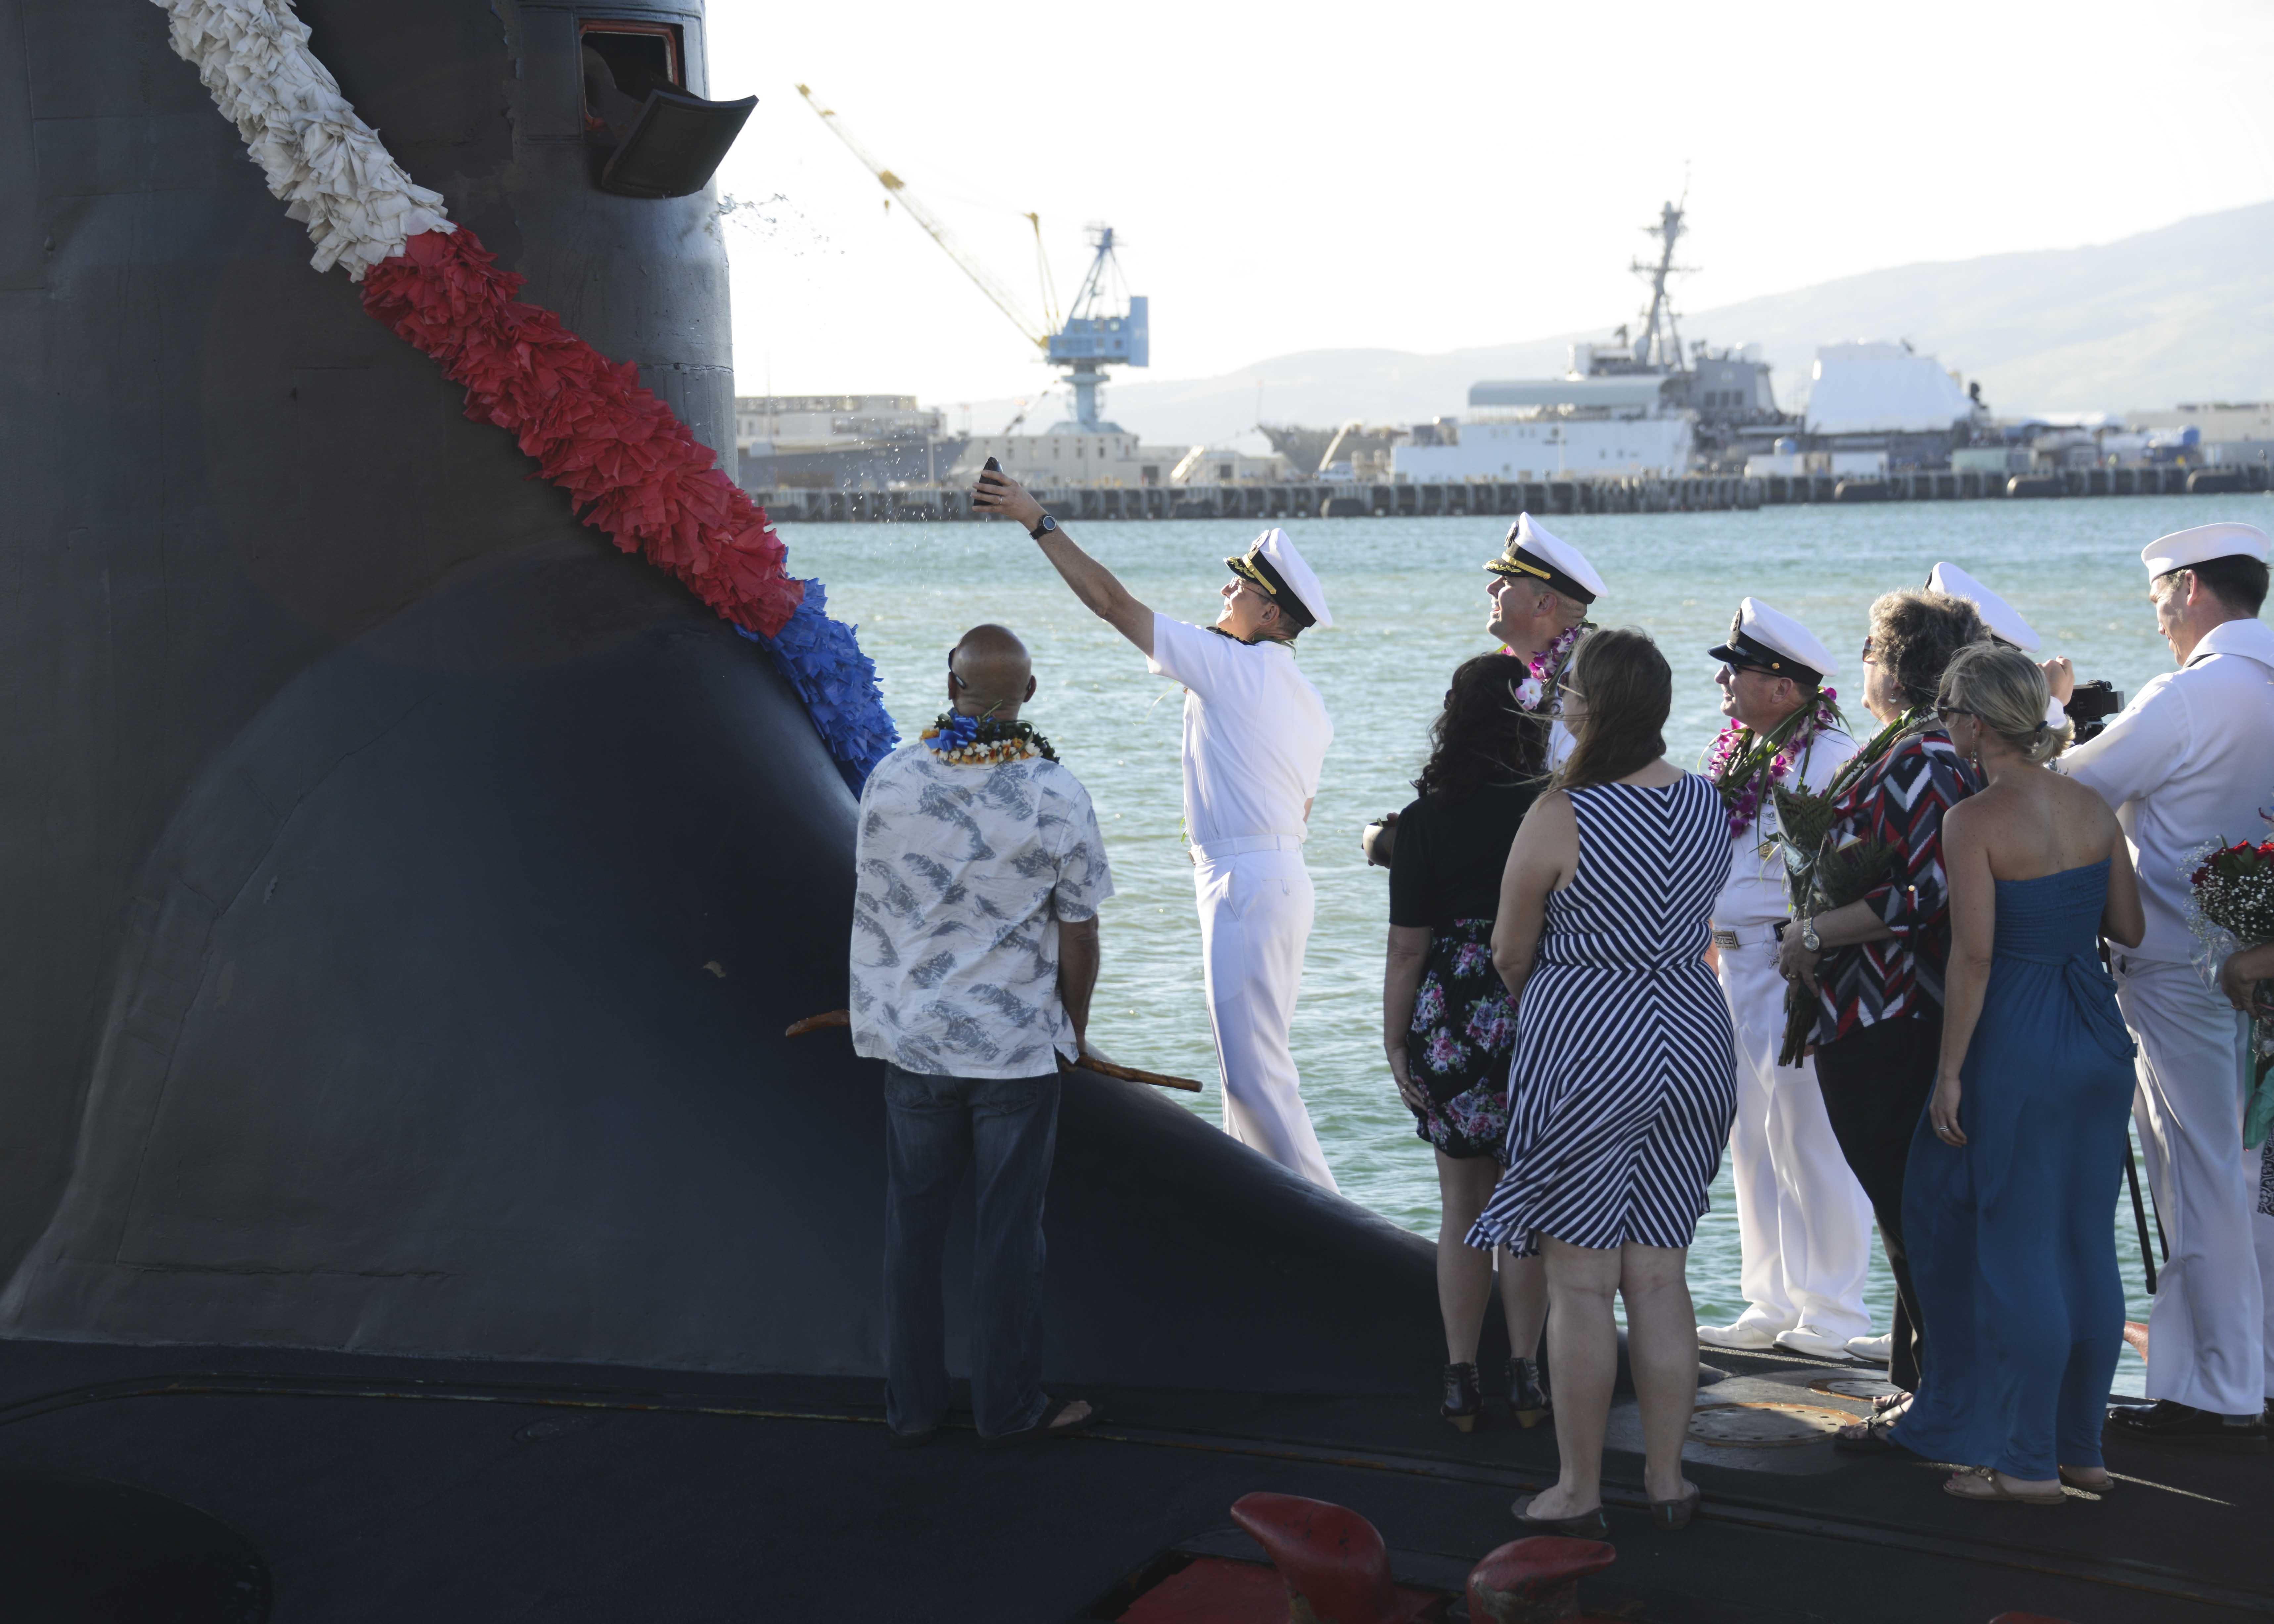 PEARL HARBOR (Nov. 25, 2014) Capt. Harry Ganteaume, commodore of Submarine Squadron (SUBRON) 1, participates in a traditional Hawaiian blessing ceremony of the Virginia-class attack submarine USS Mississippi (SSN 782) upon the ship's arrival at Joint Base Pearl Harbor-Hickam. U.S. Navy photo by Mass Communication Specialist 1st Class Steven Khor.